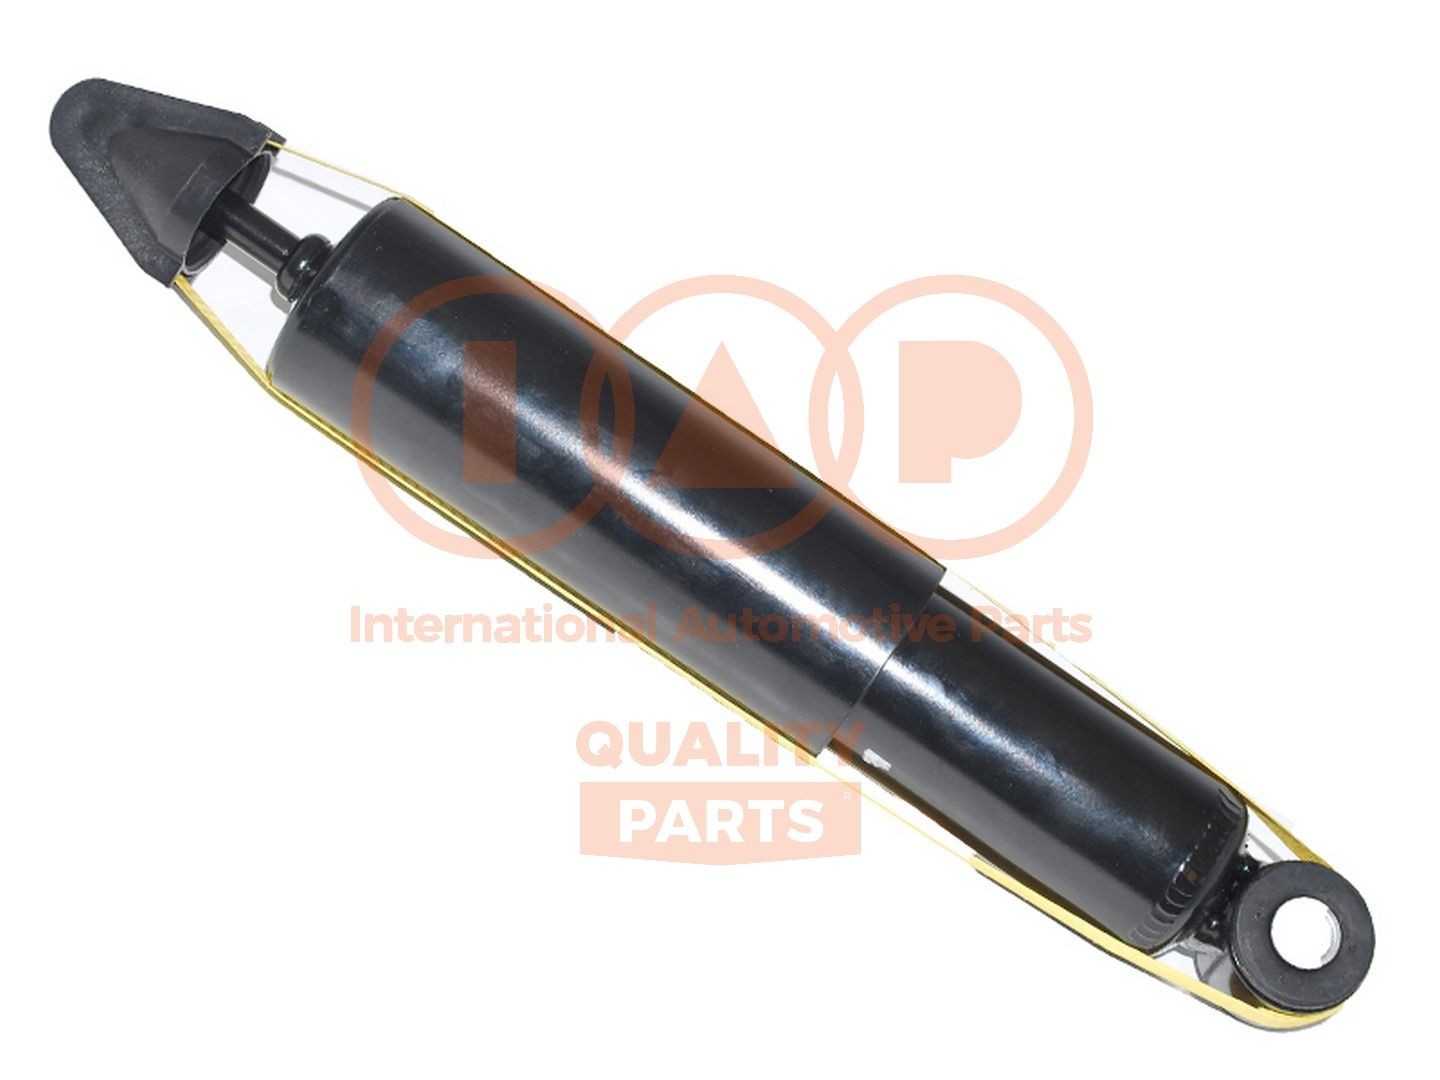 IAP QUALITY PARTS 504-13043 Shock absorber 561100X450